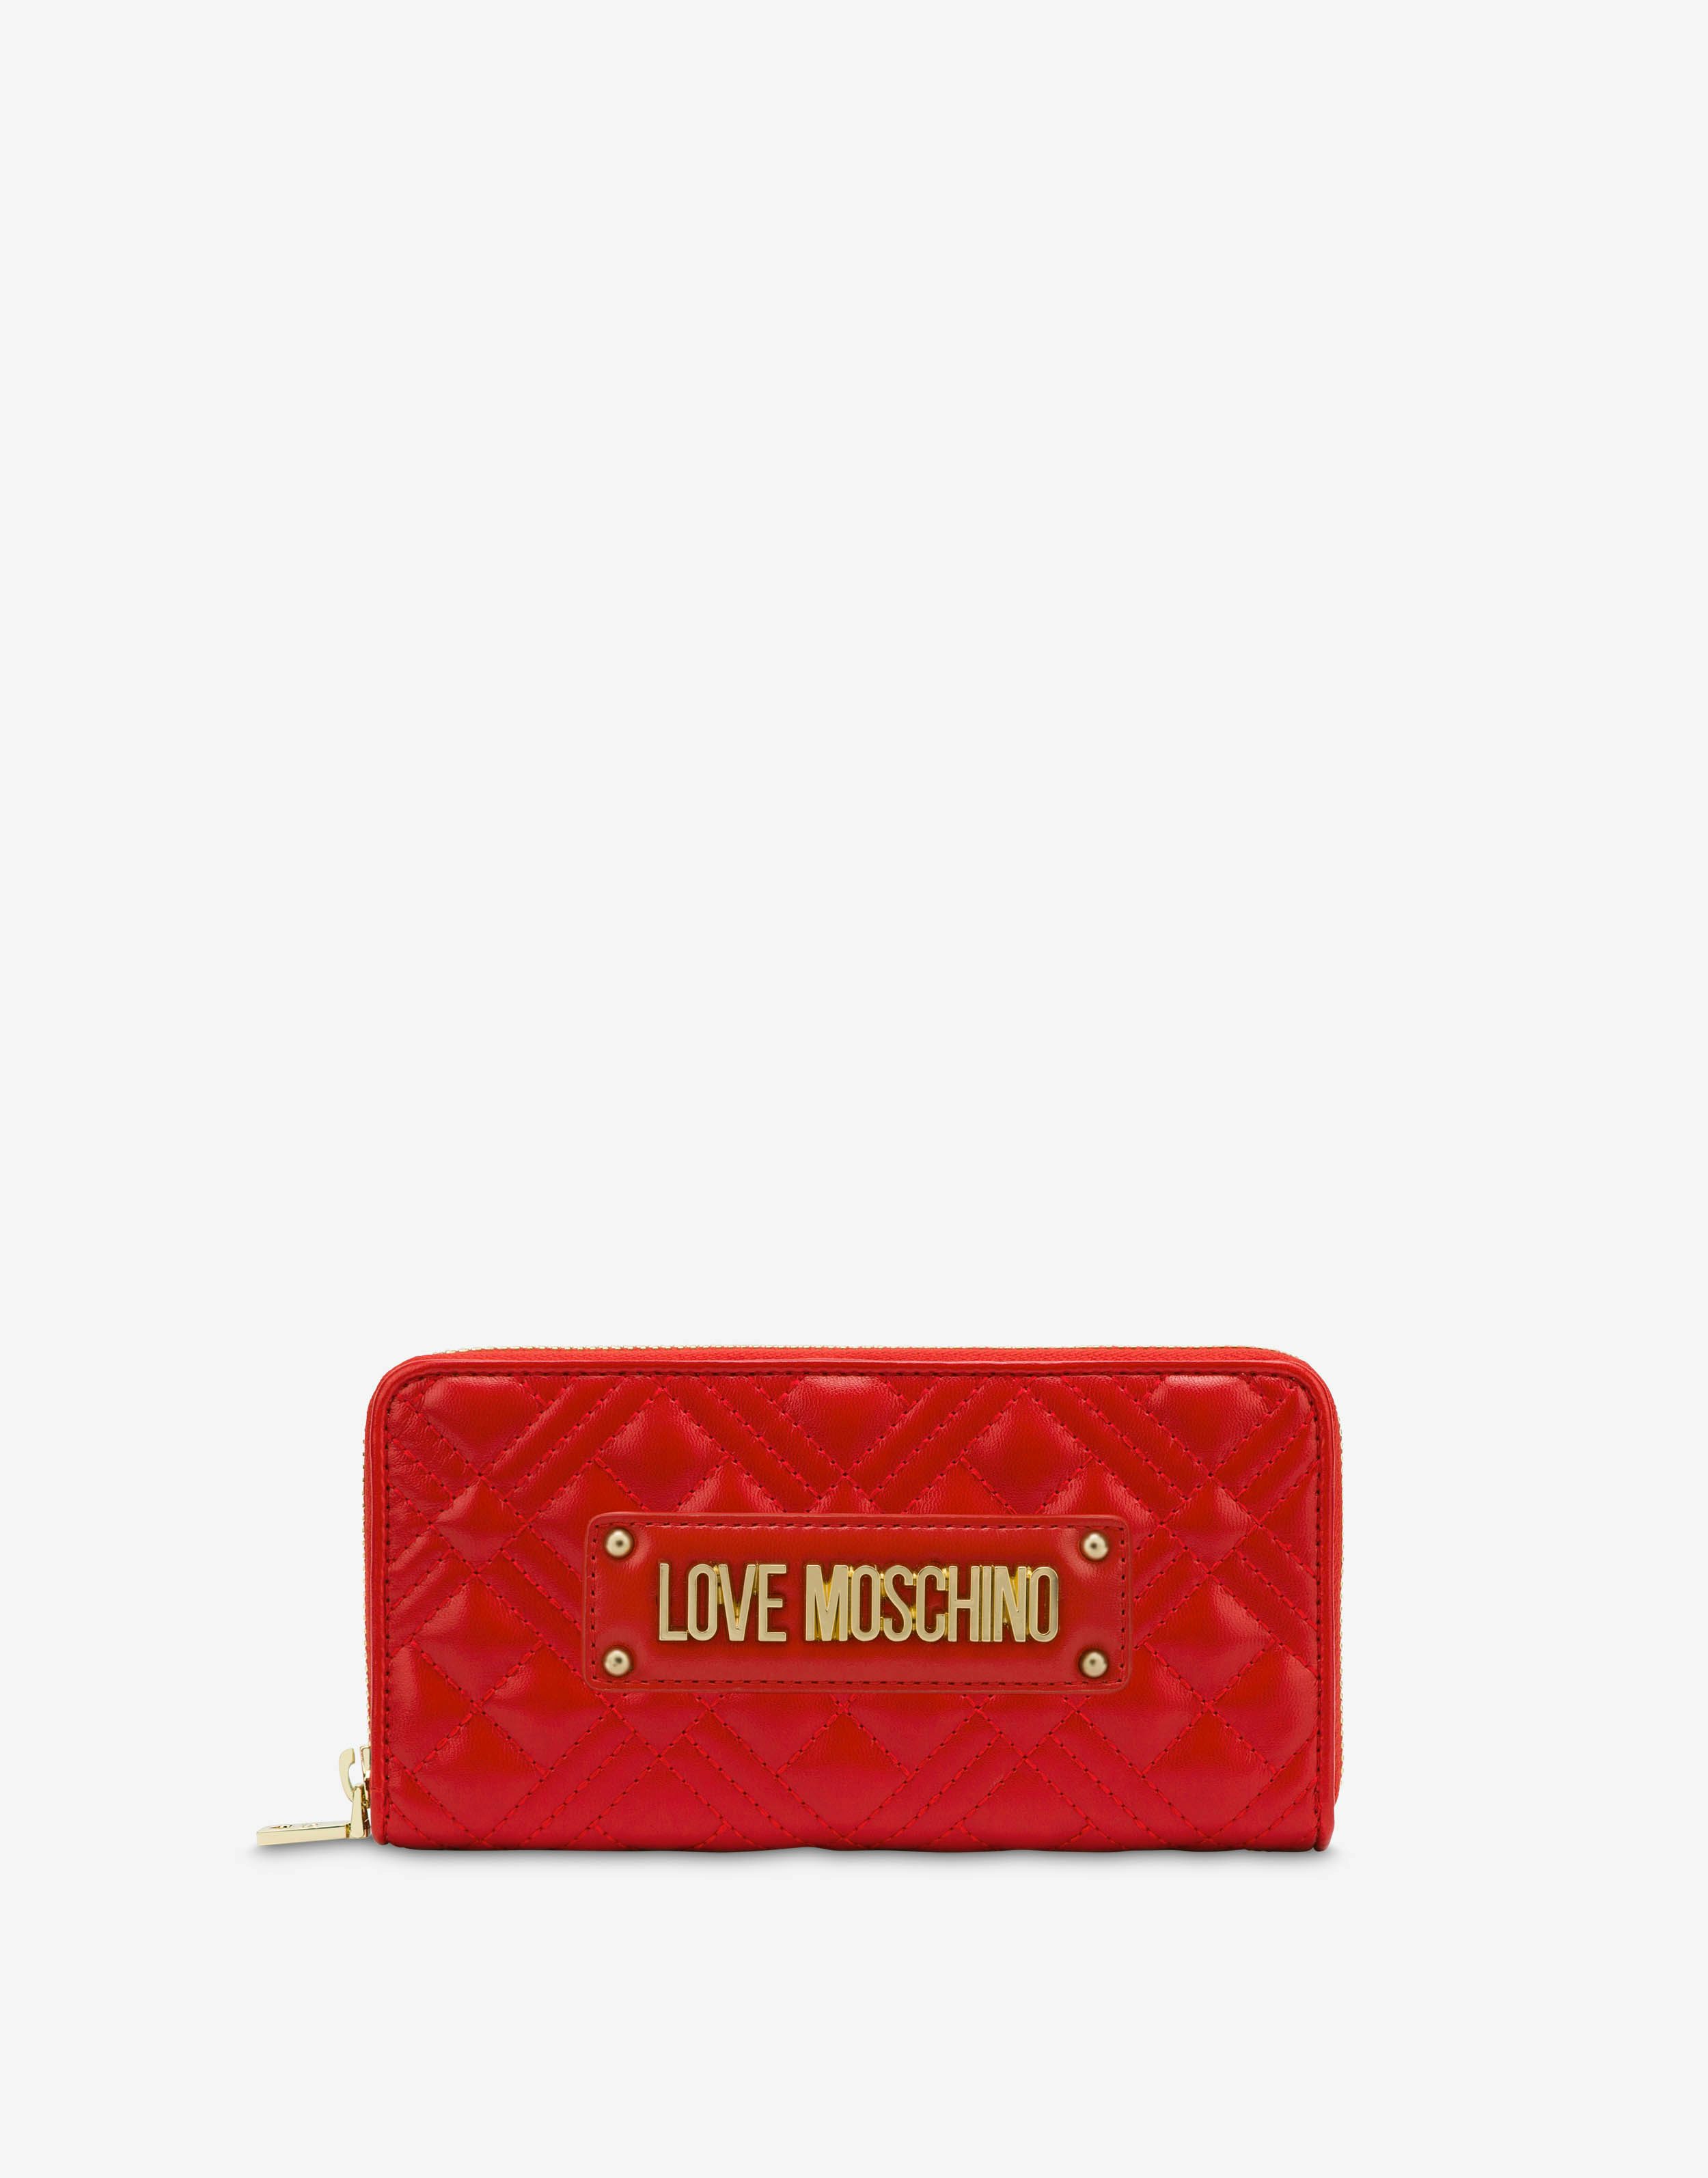 Love Moschino Wallets for Women - Official Store